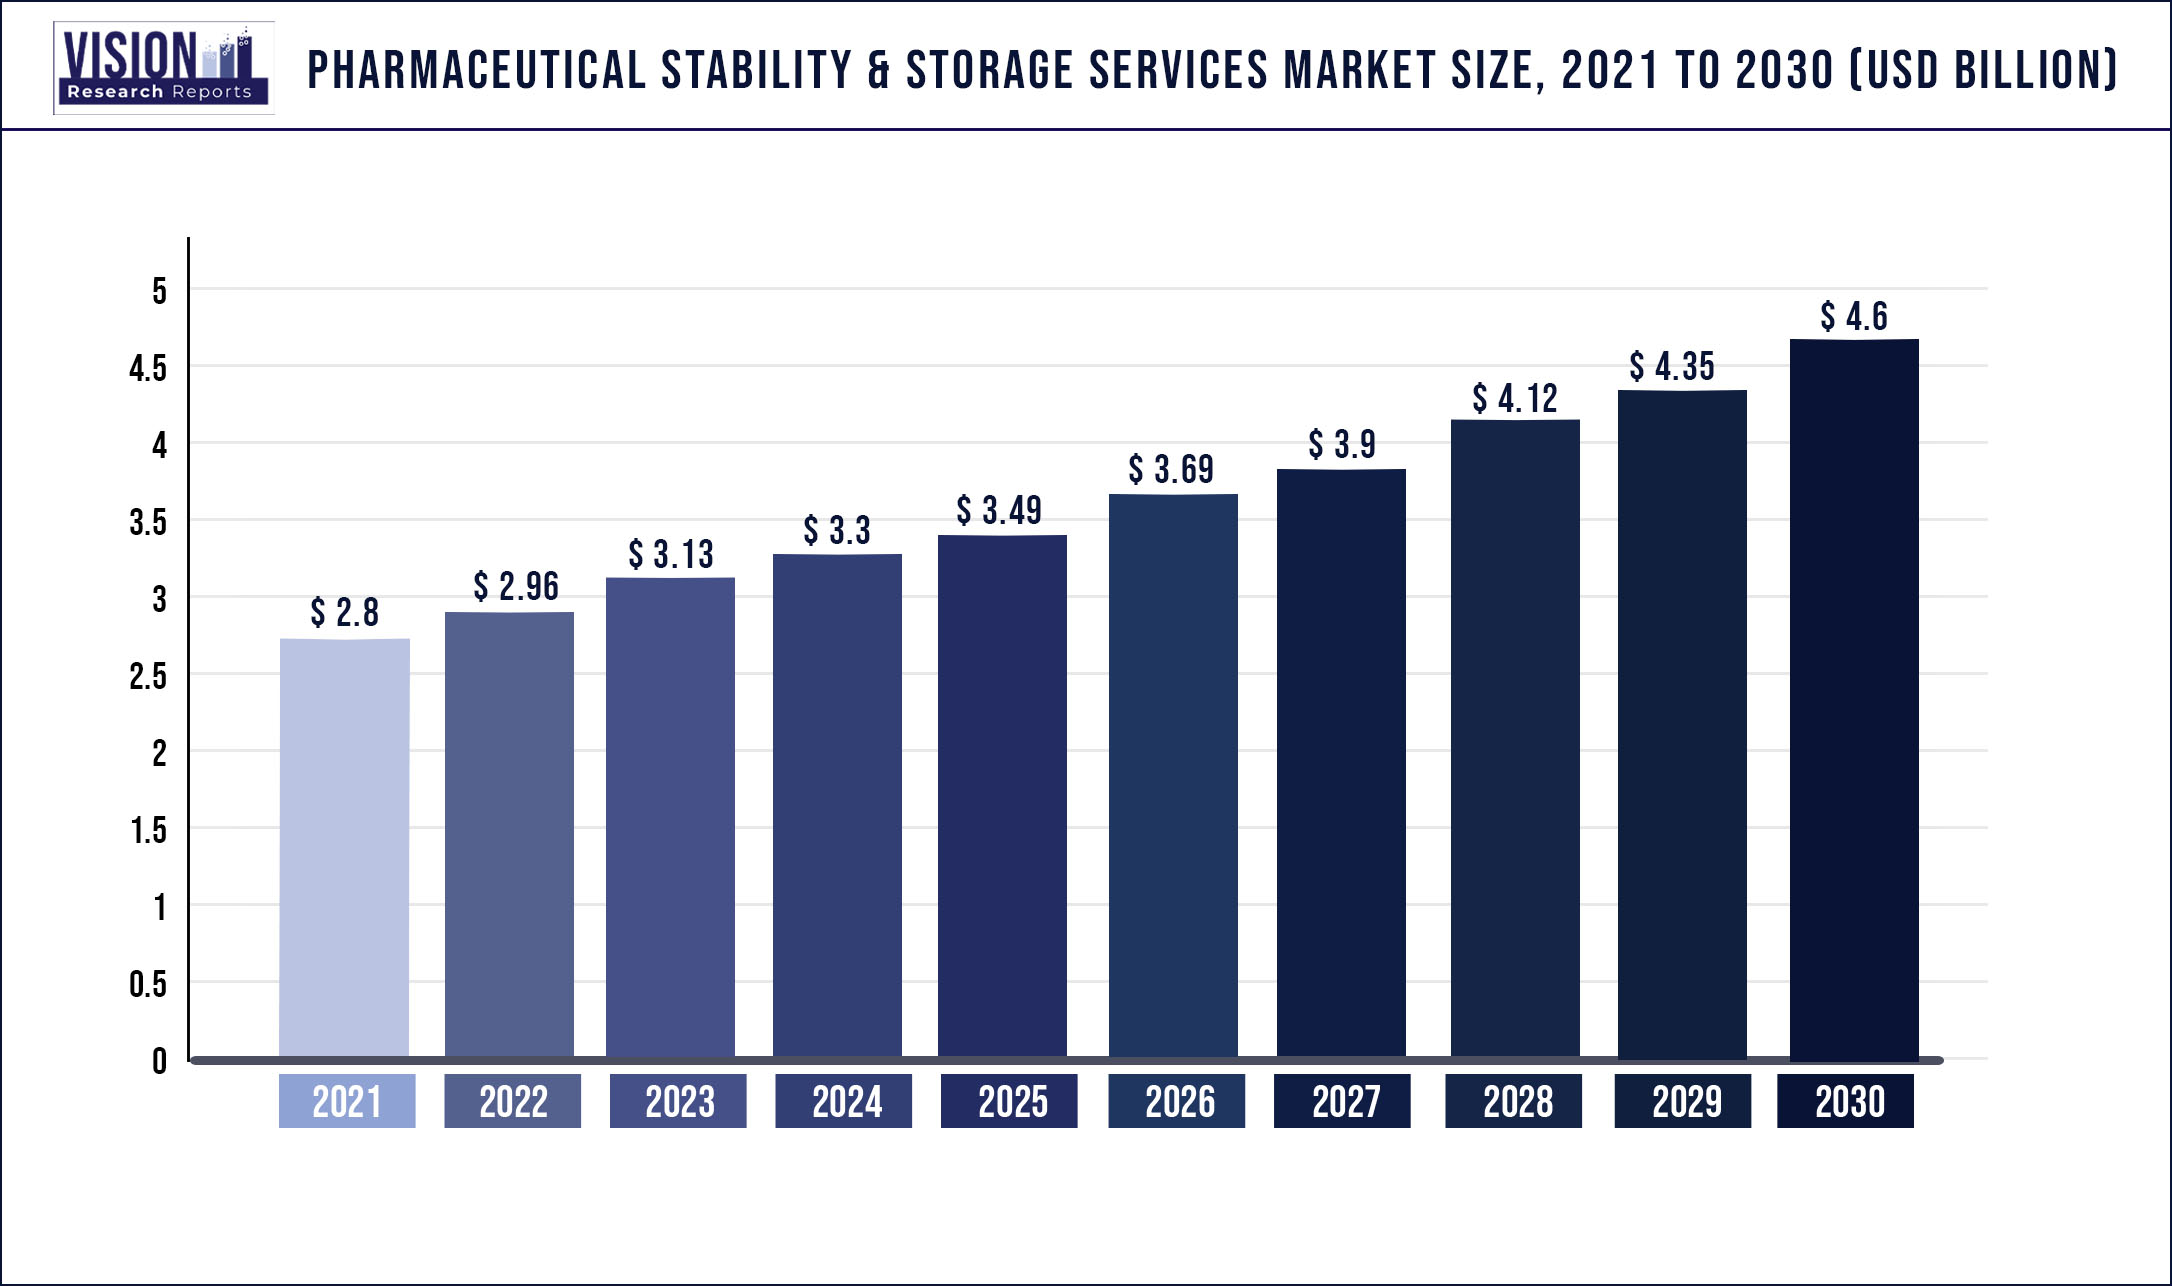 Pharmaceutical Stability & Storage Services Market Size 2021 to 2030